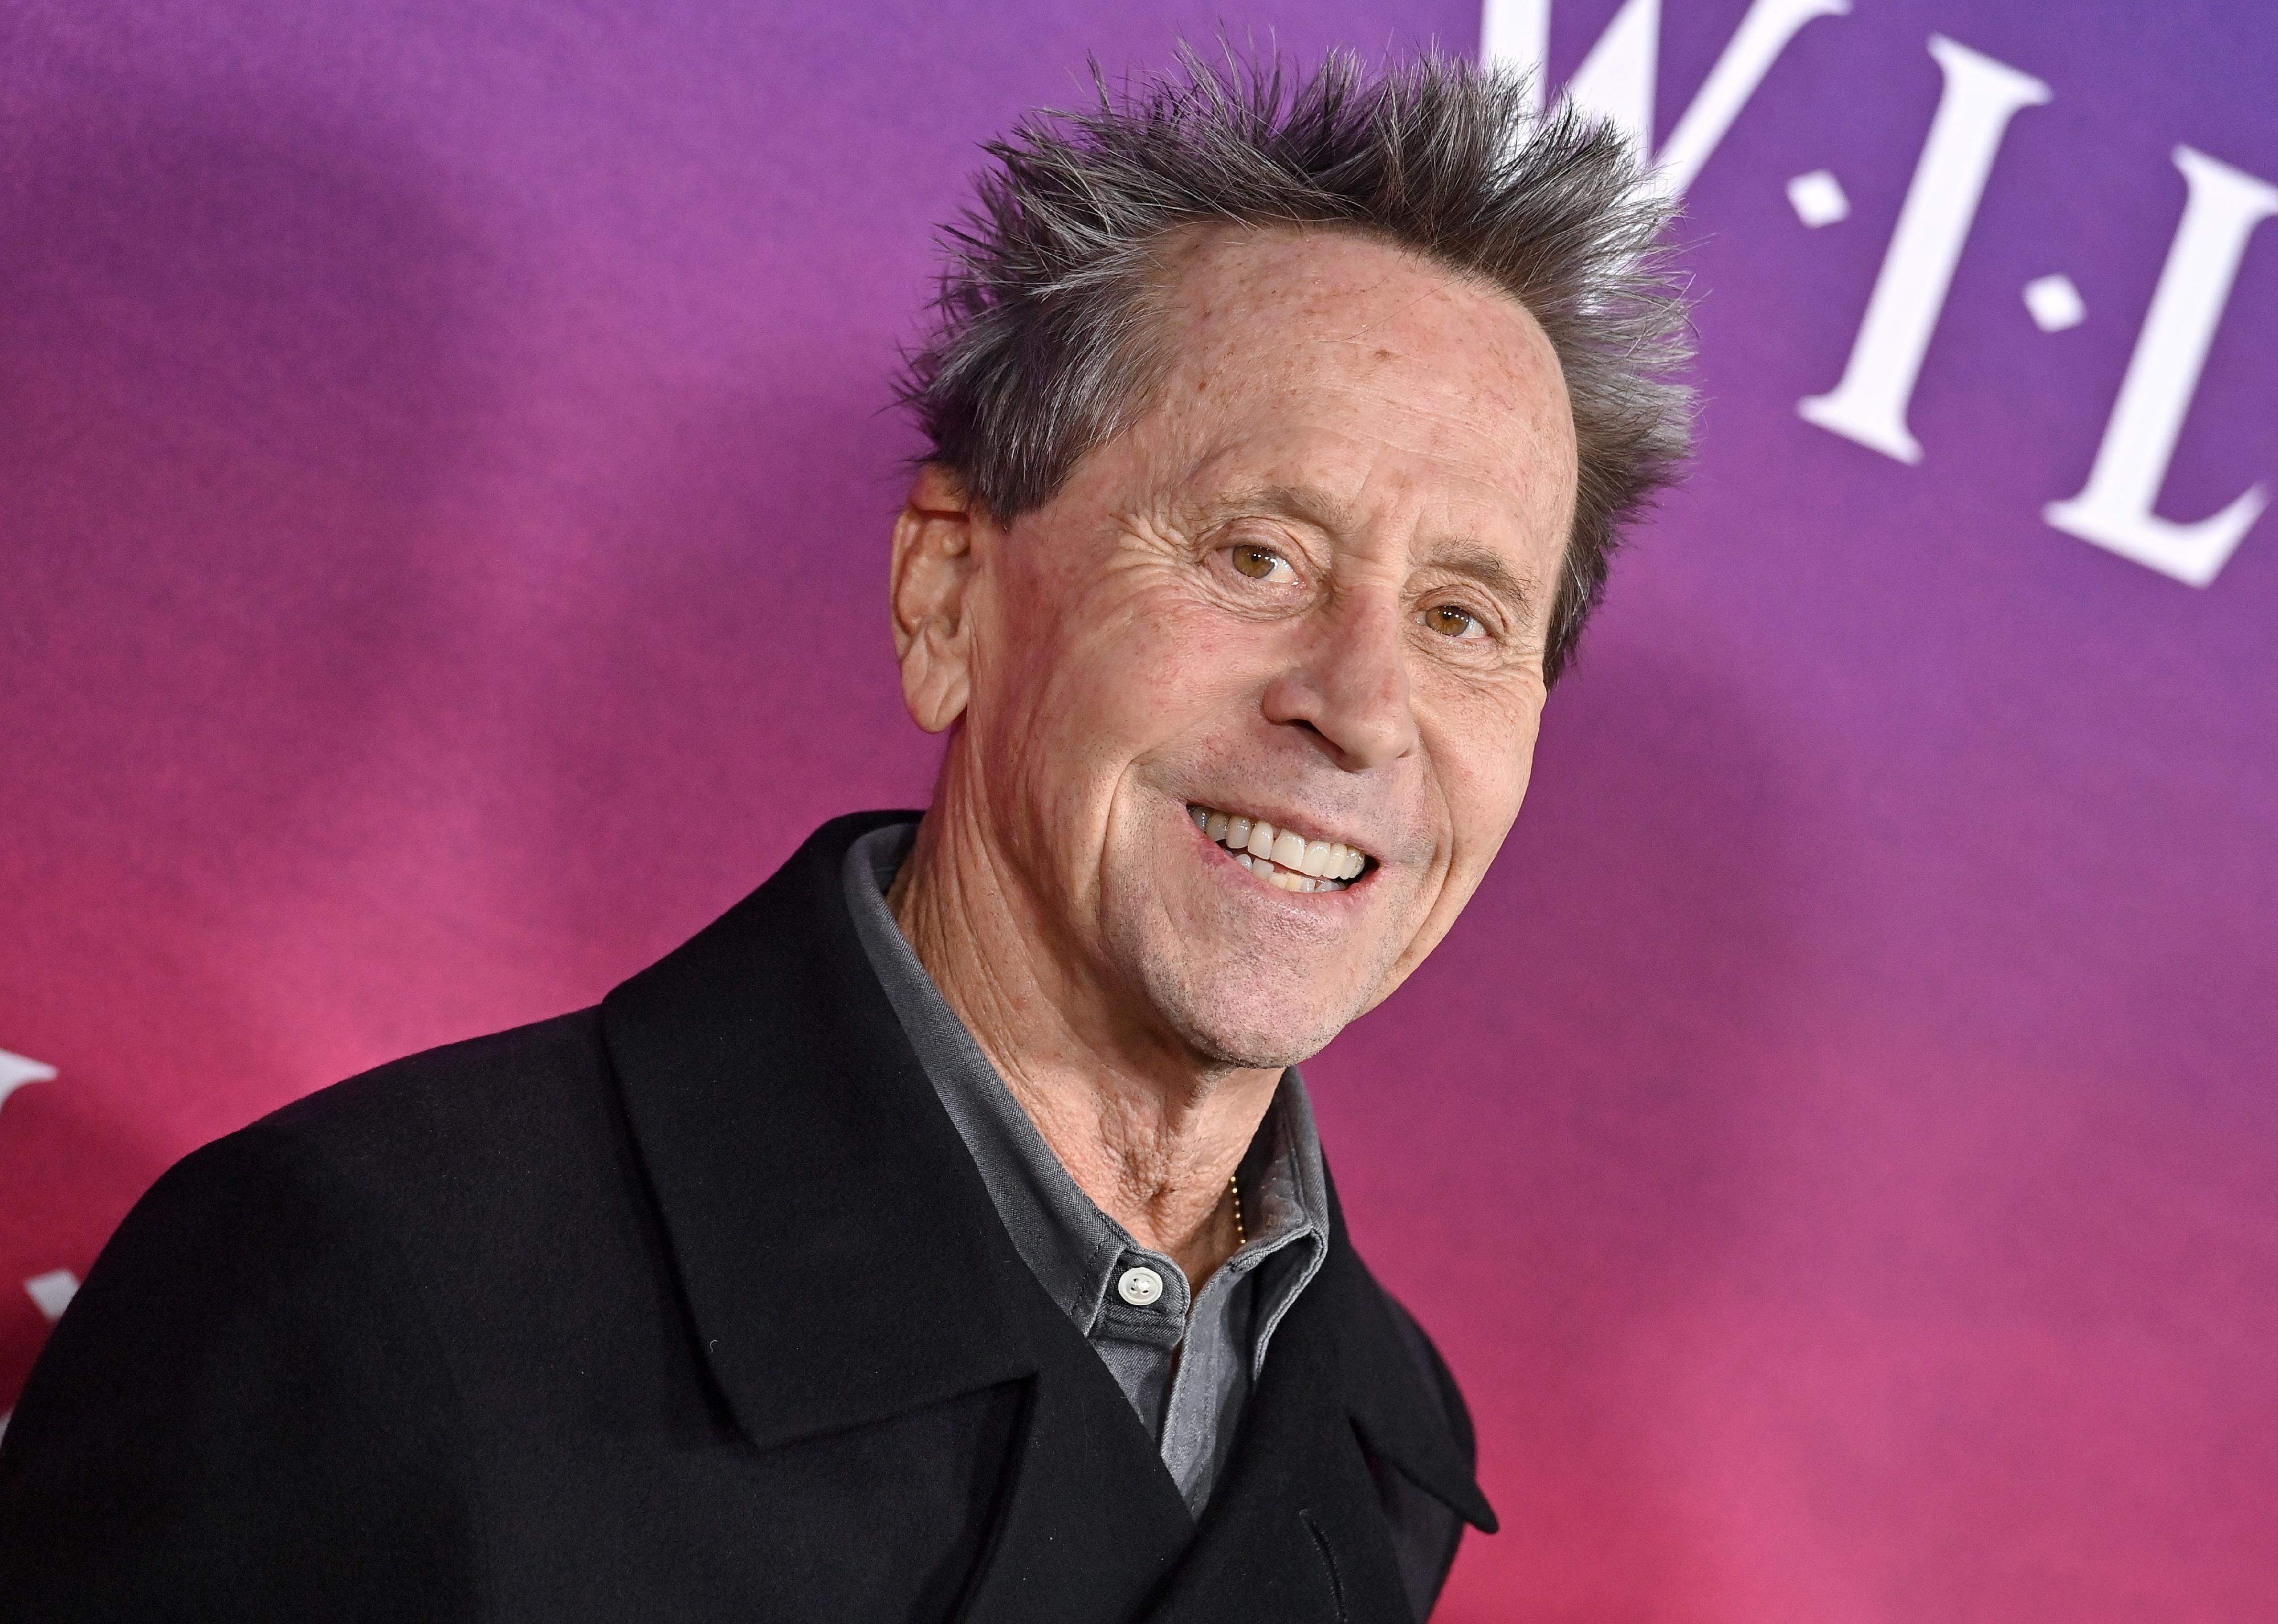 Brian Grazer attends Lucasfilm and Imagine Entertainment's New Series "Willow" Premiere.